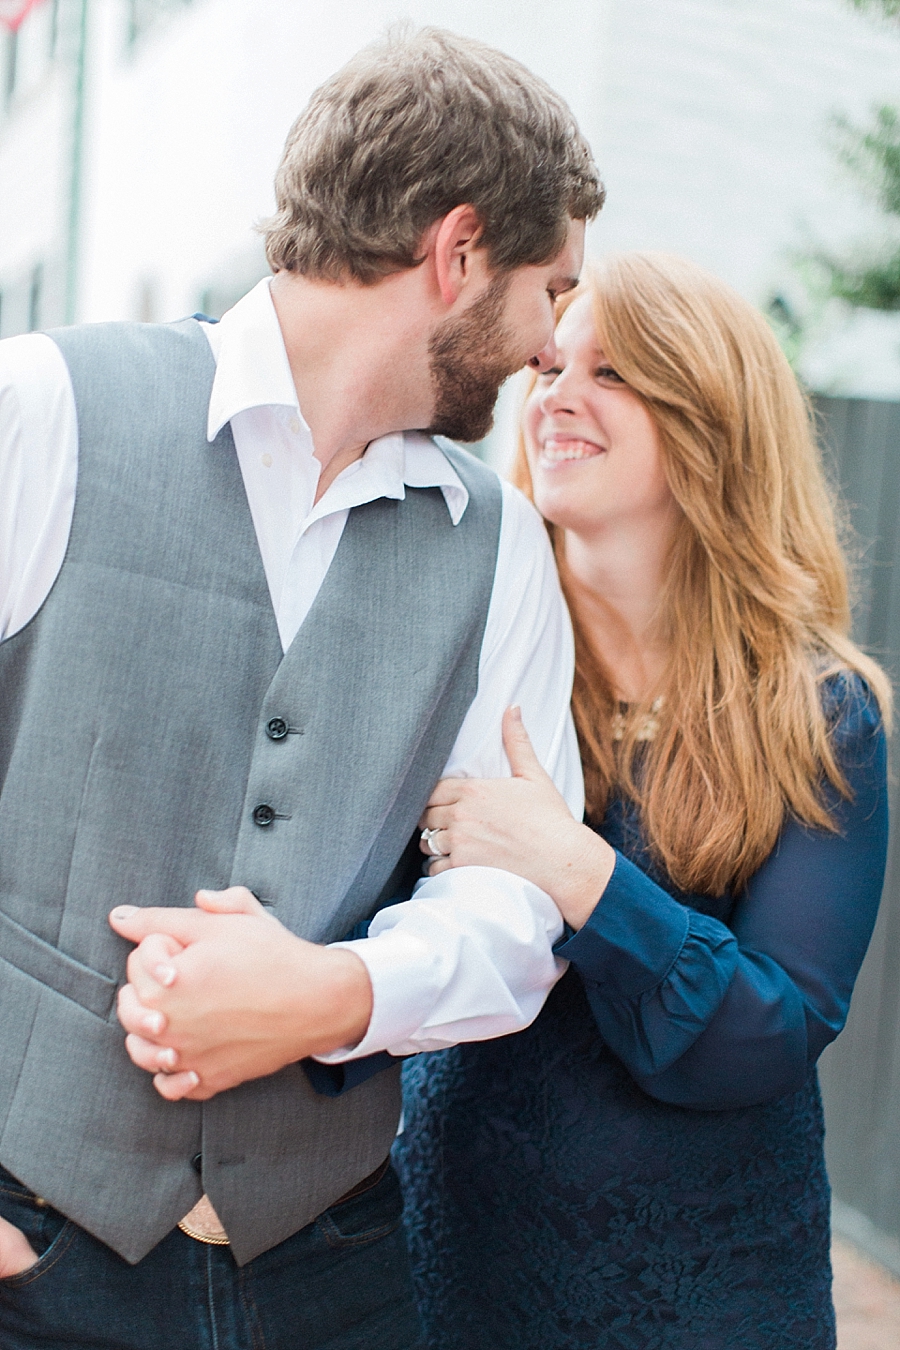 Old Town Alexandria anniversary session | Abby Grace Photography